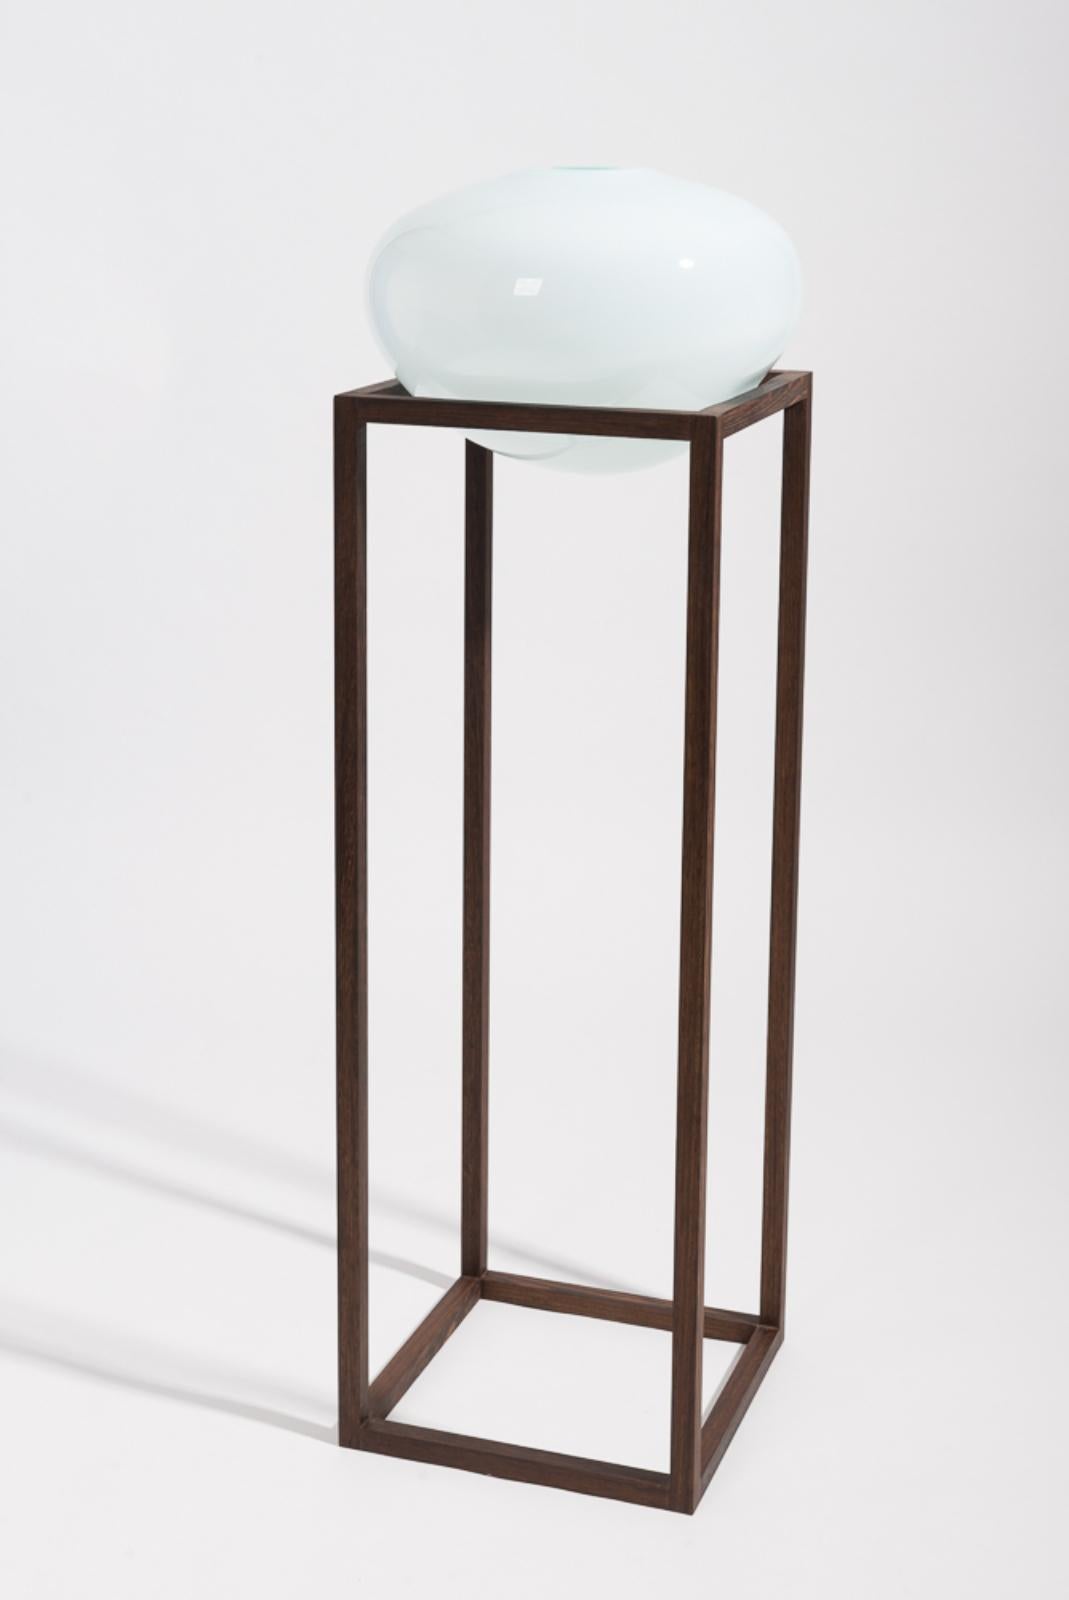 High round square green vase by Studio Thier & van Daalen
Dimensions: W 36 x D 36 x H 120 cm
Materials: Wood, Glass

When blowing soap bubbles in the air Iris & Ruben had the dream to capture these temporary beauties in a tendril frame. The